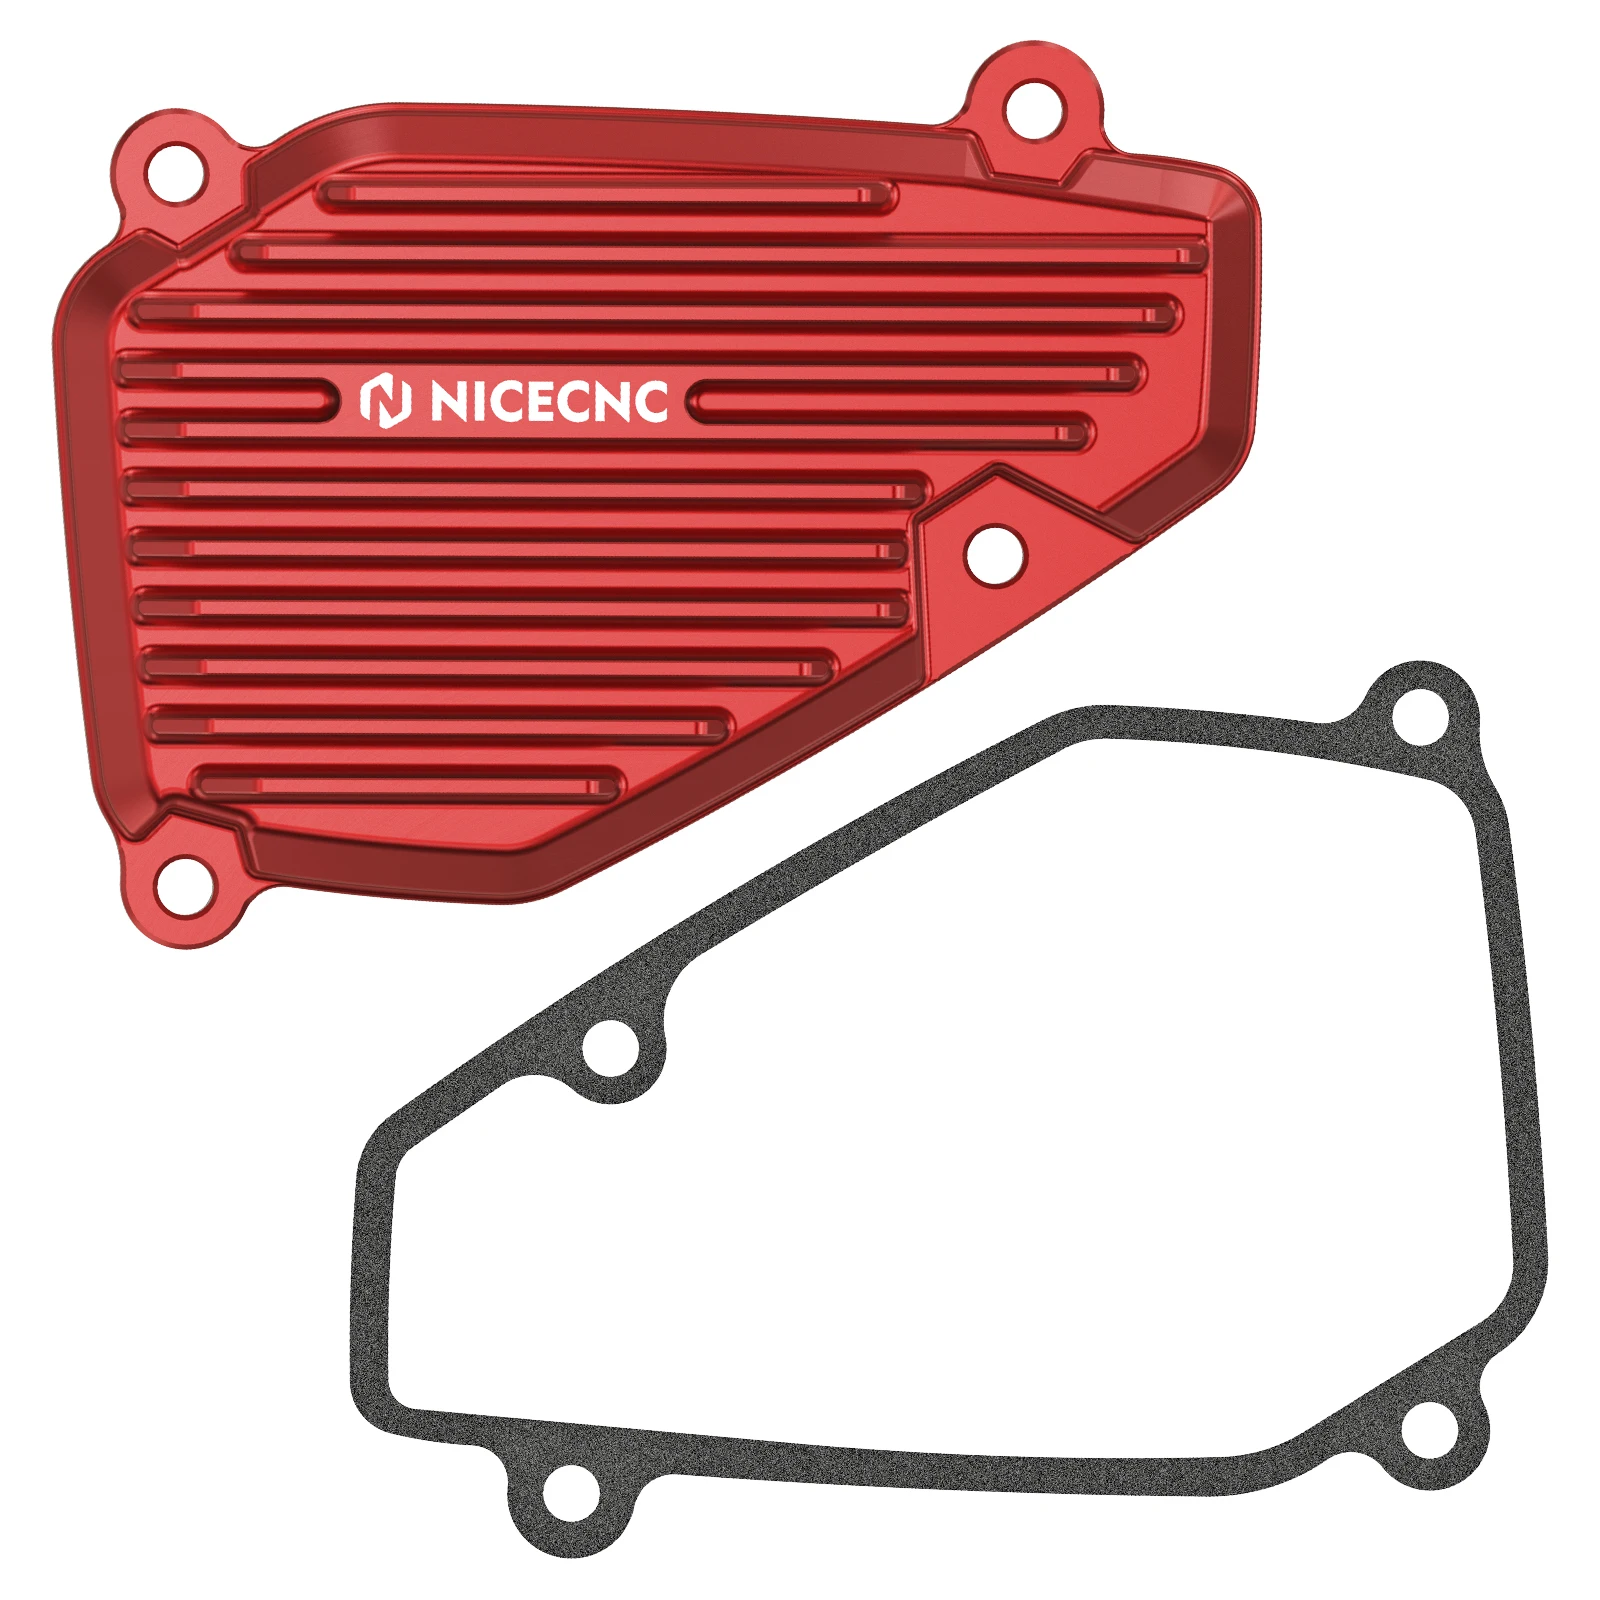 

For BETA 250 300 RR XTRAINER RR250 RR300 XTRAINER250 XTRAINER300 2013-2022 2021 Power Valve Cover Guard Protector Motocross Red